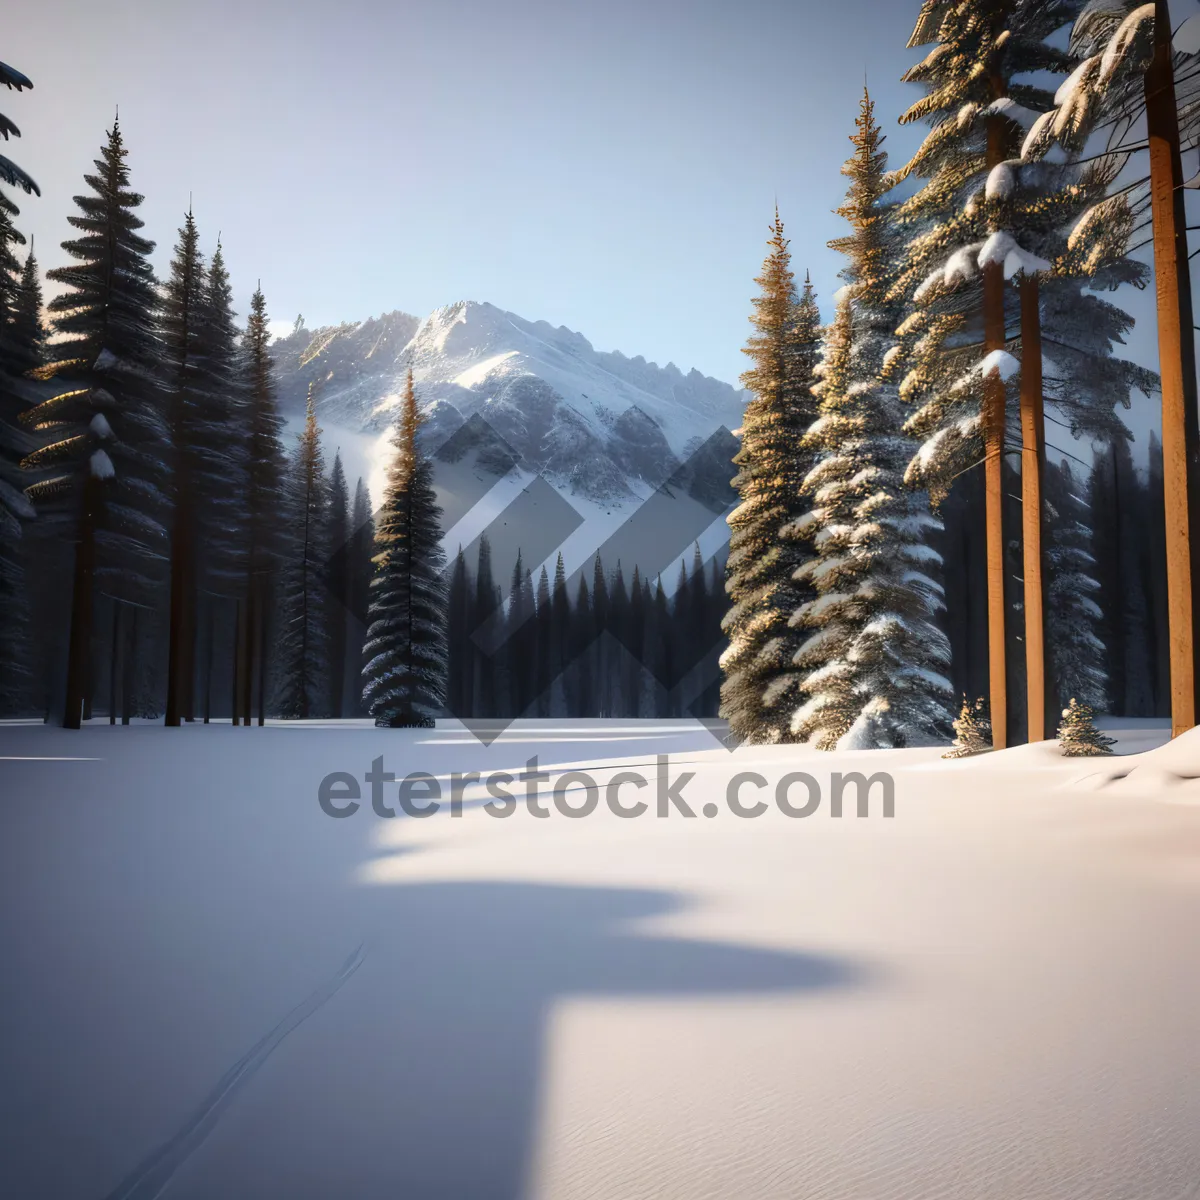 Picture of Snowy Winter Forest Landscape with Majestic Mountains